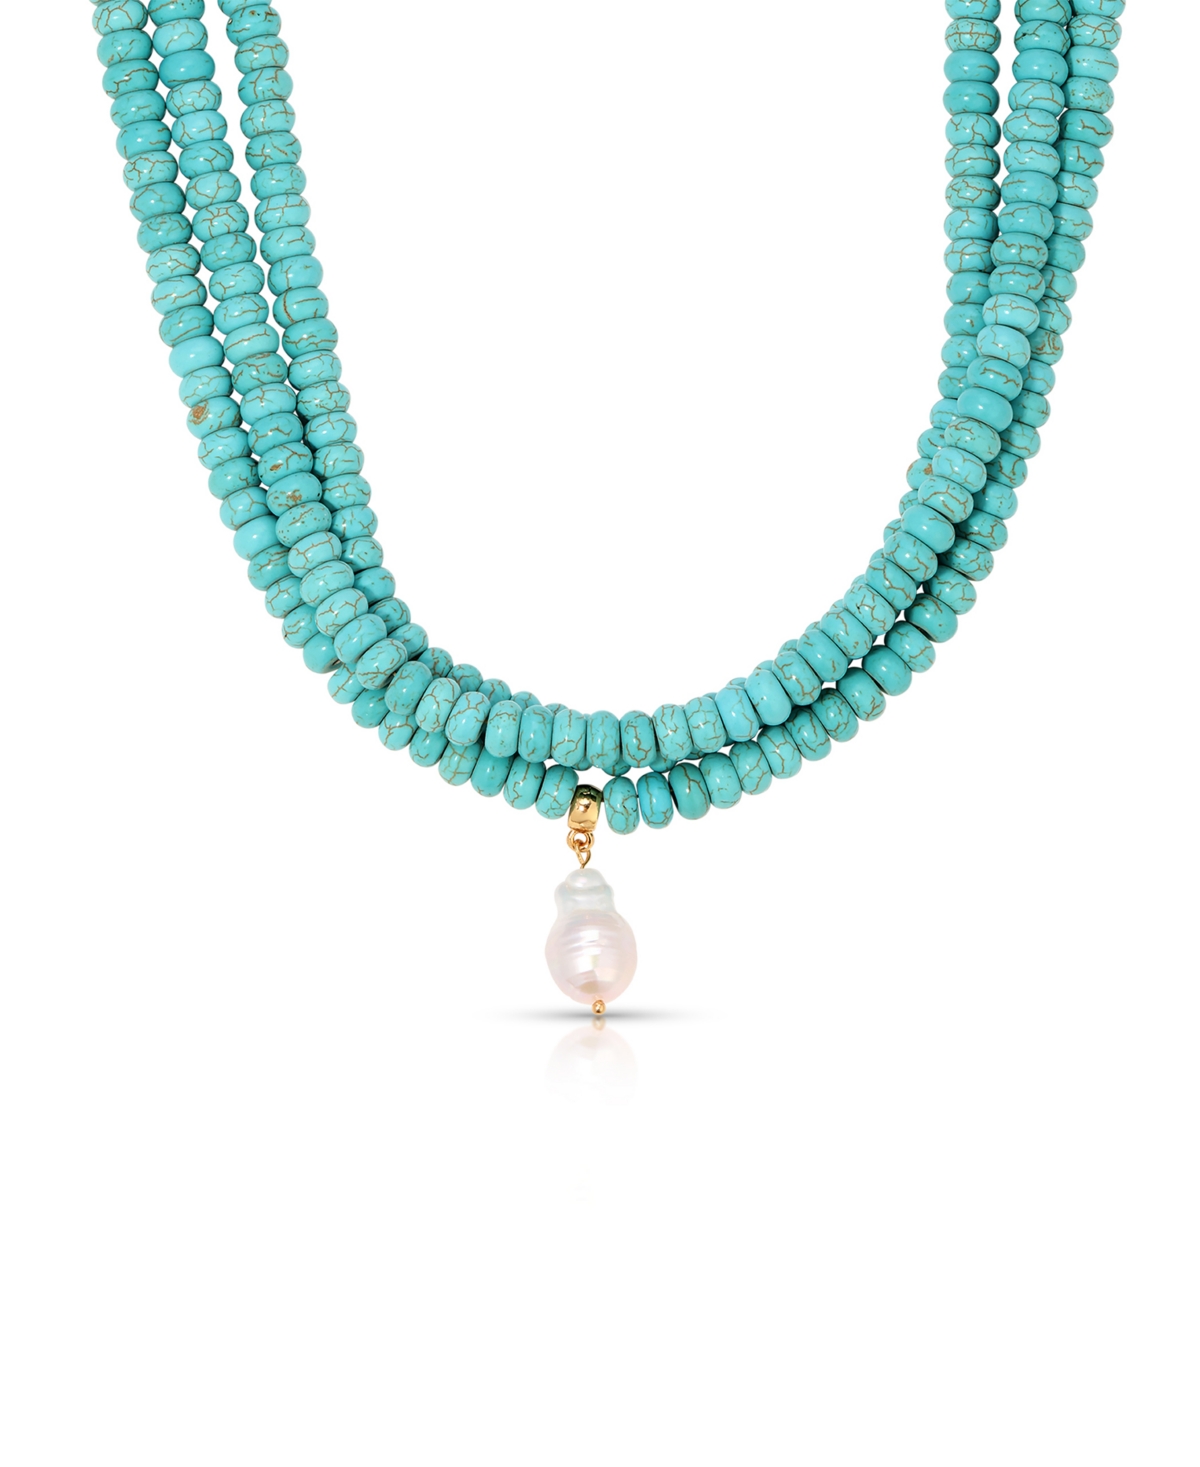 Triple Strand Turquoise Statement Necklace with Cultivated Pearl Dangle - Turquoise